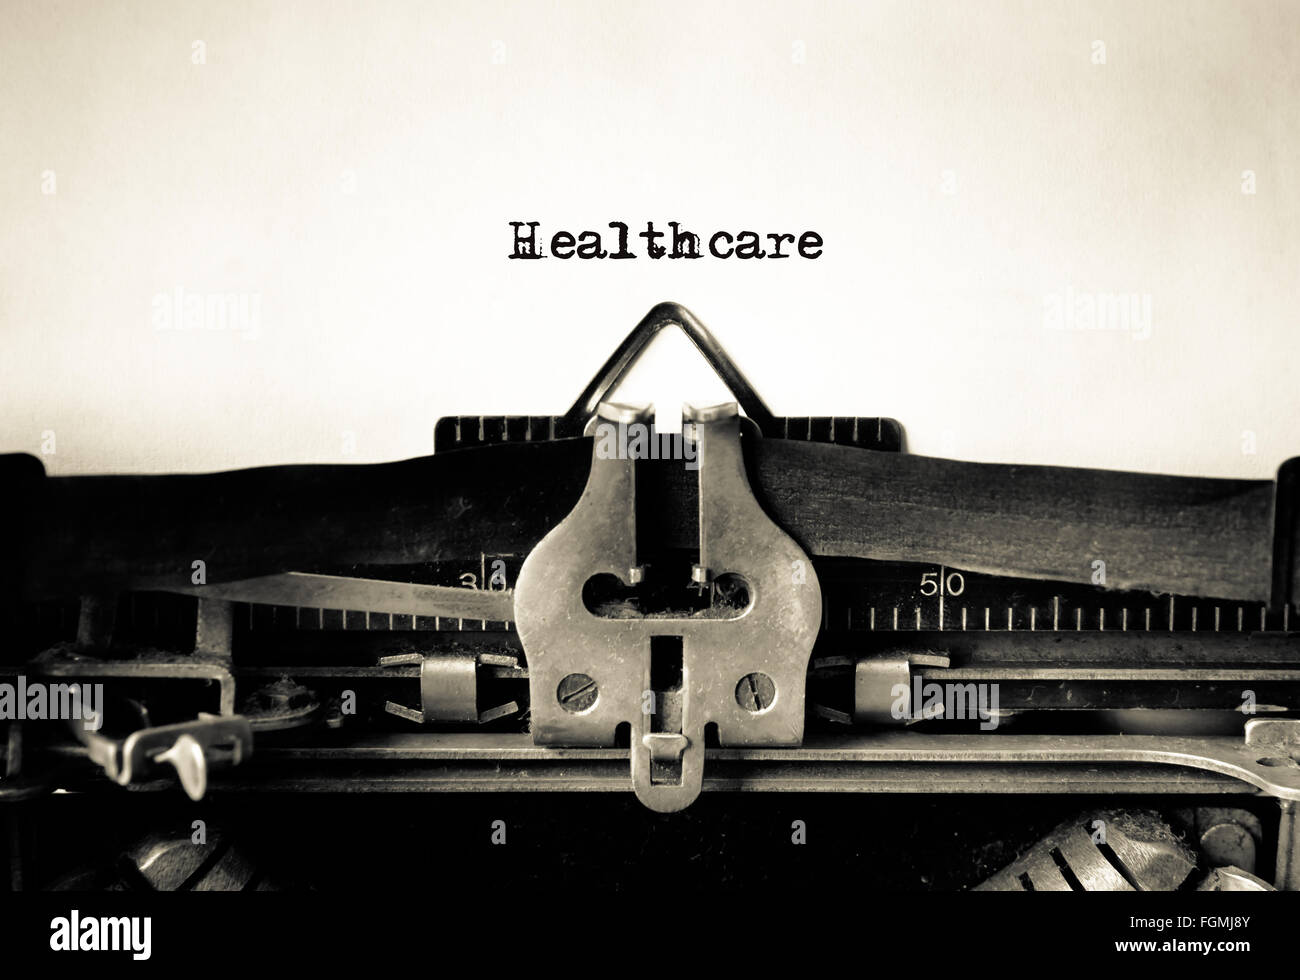 Healthcare message typed on a vintage typewriter Stock Photo